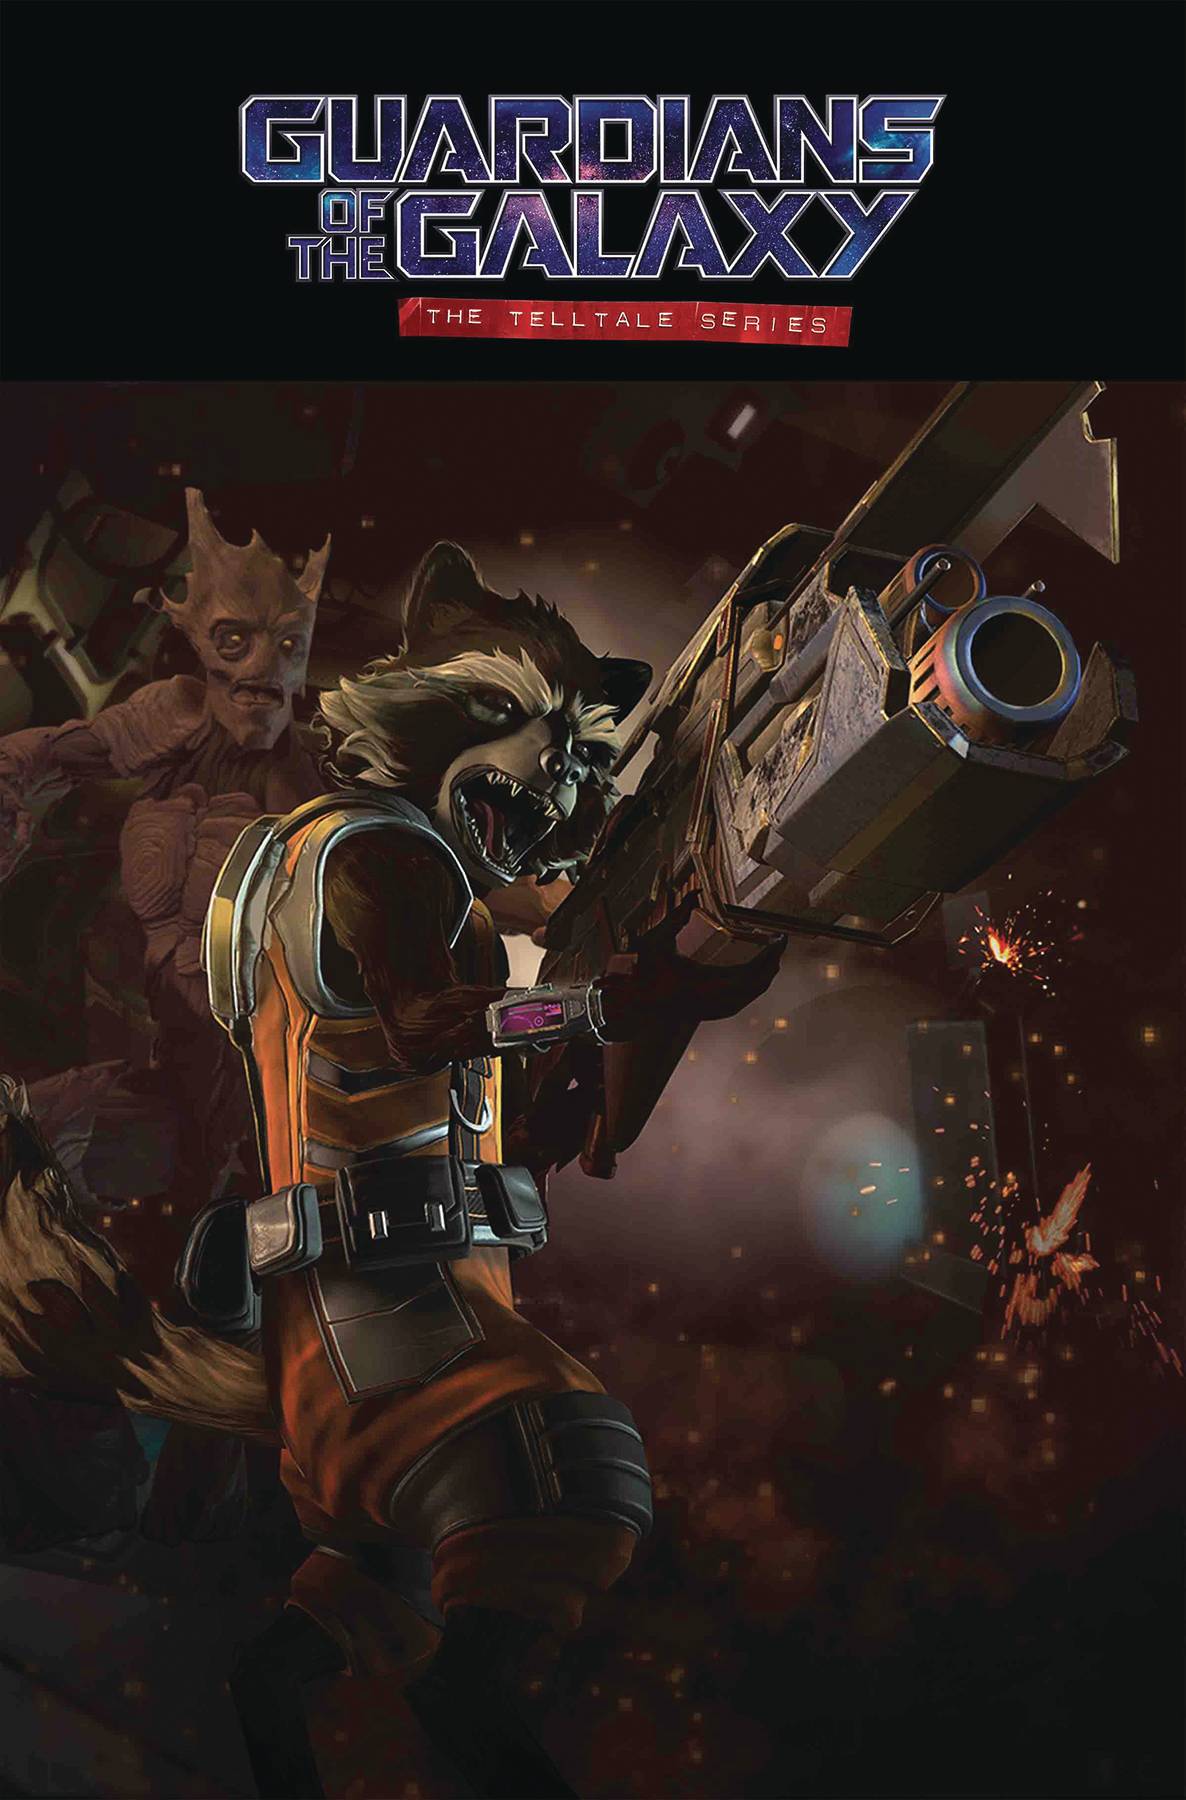 GUARDIANS OF THE GALAXY: THE TELLTALE SERIES#2